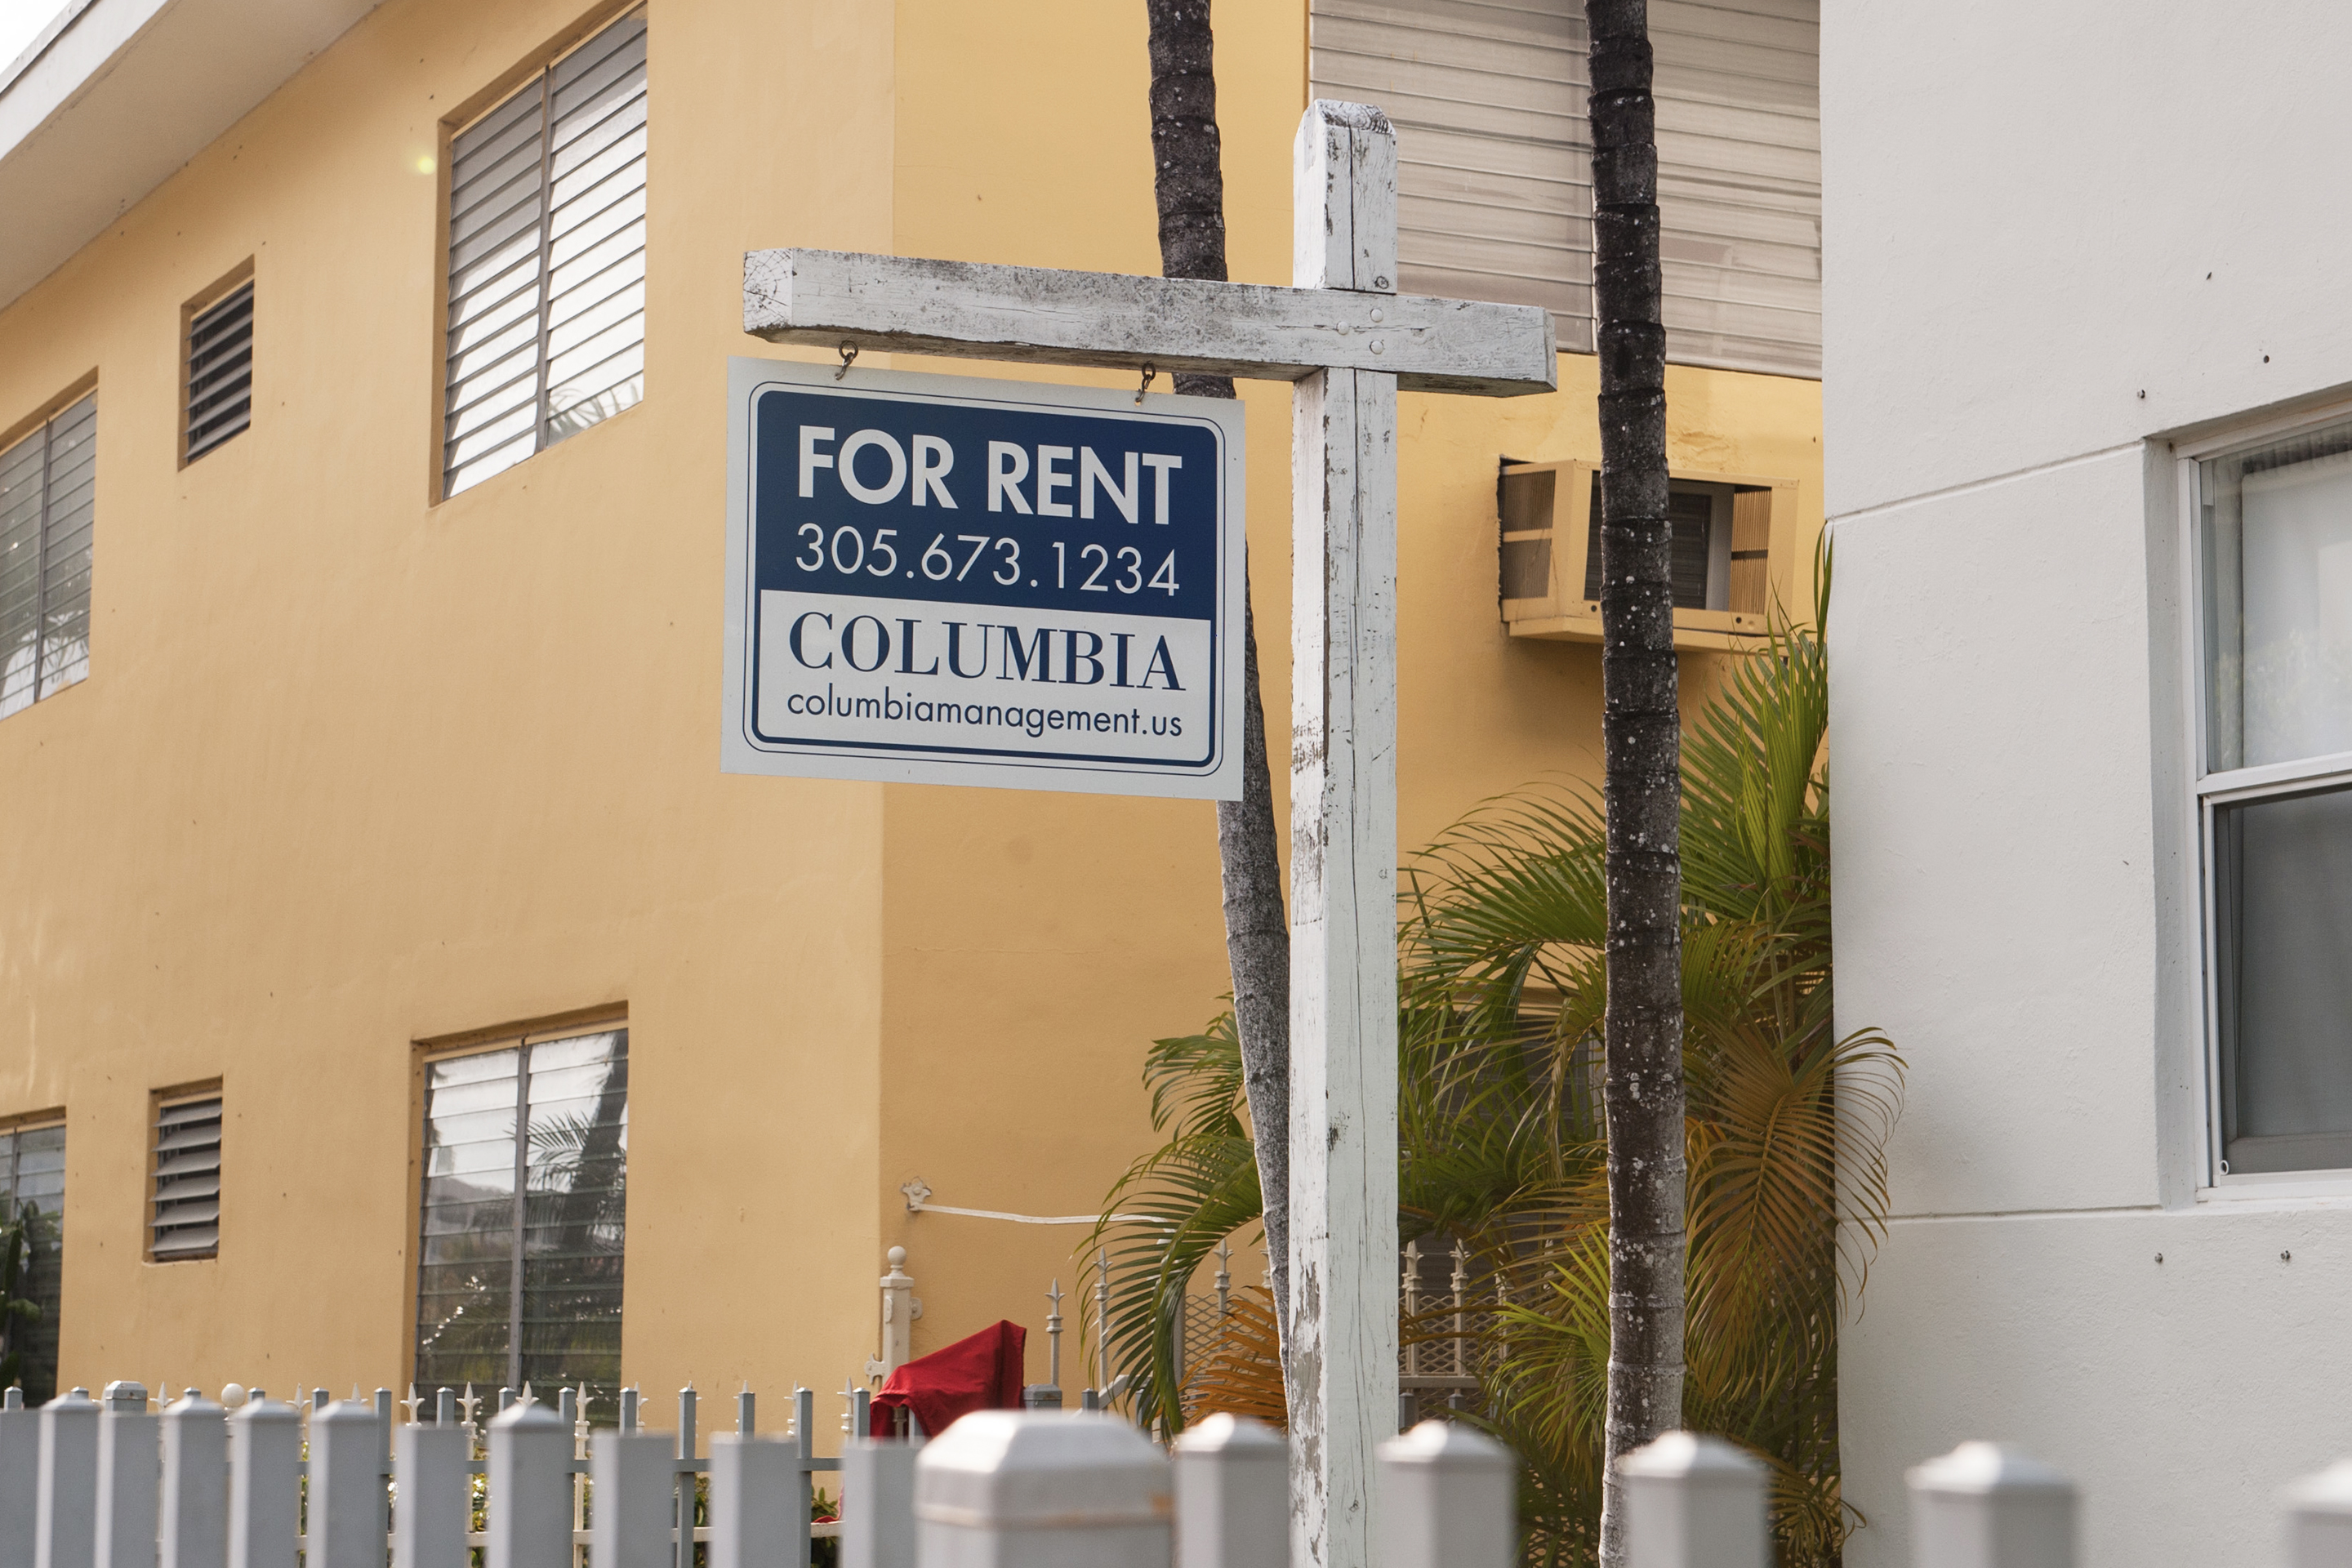 Rent Increases in the U.S. Have Broken Records for 13 Consecutive Months